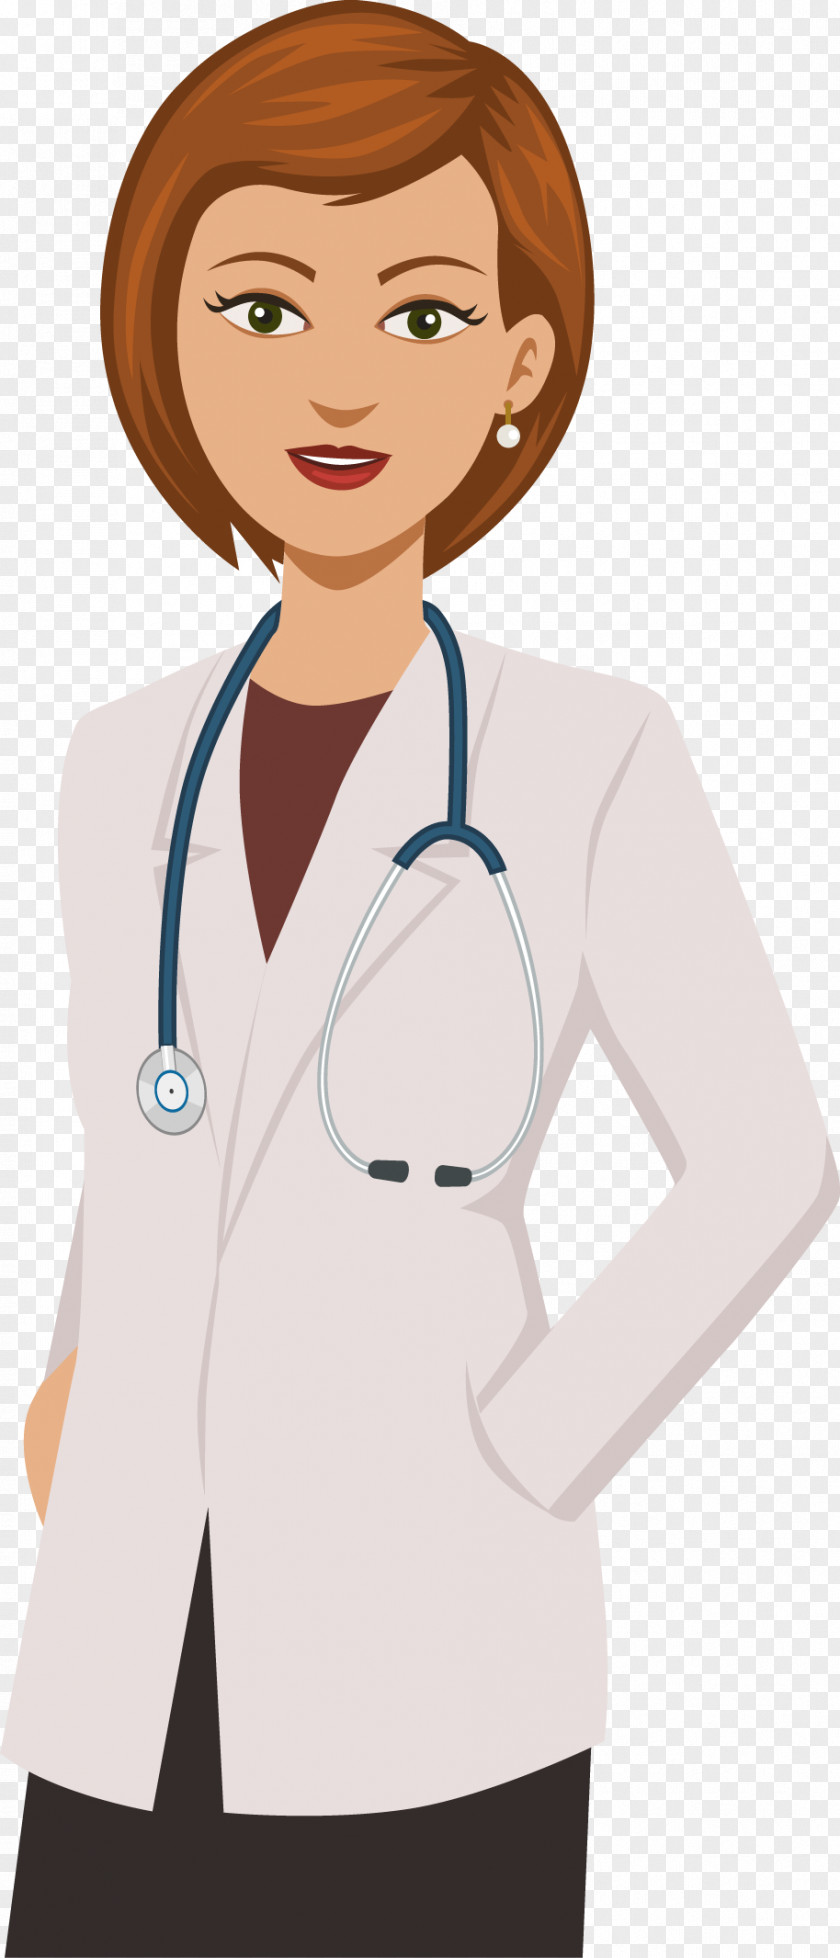 Cartoon Female Doctor Network Physician Adventure Time PNG